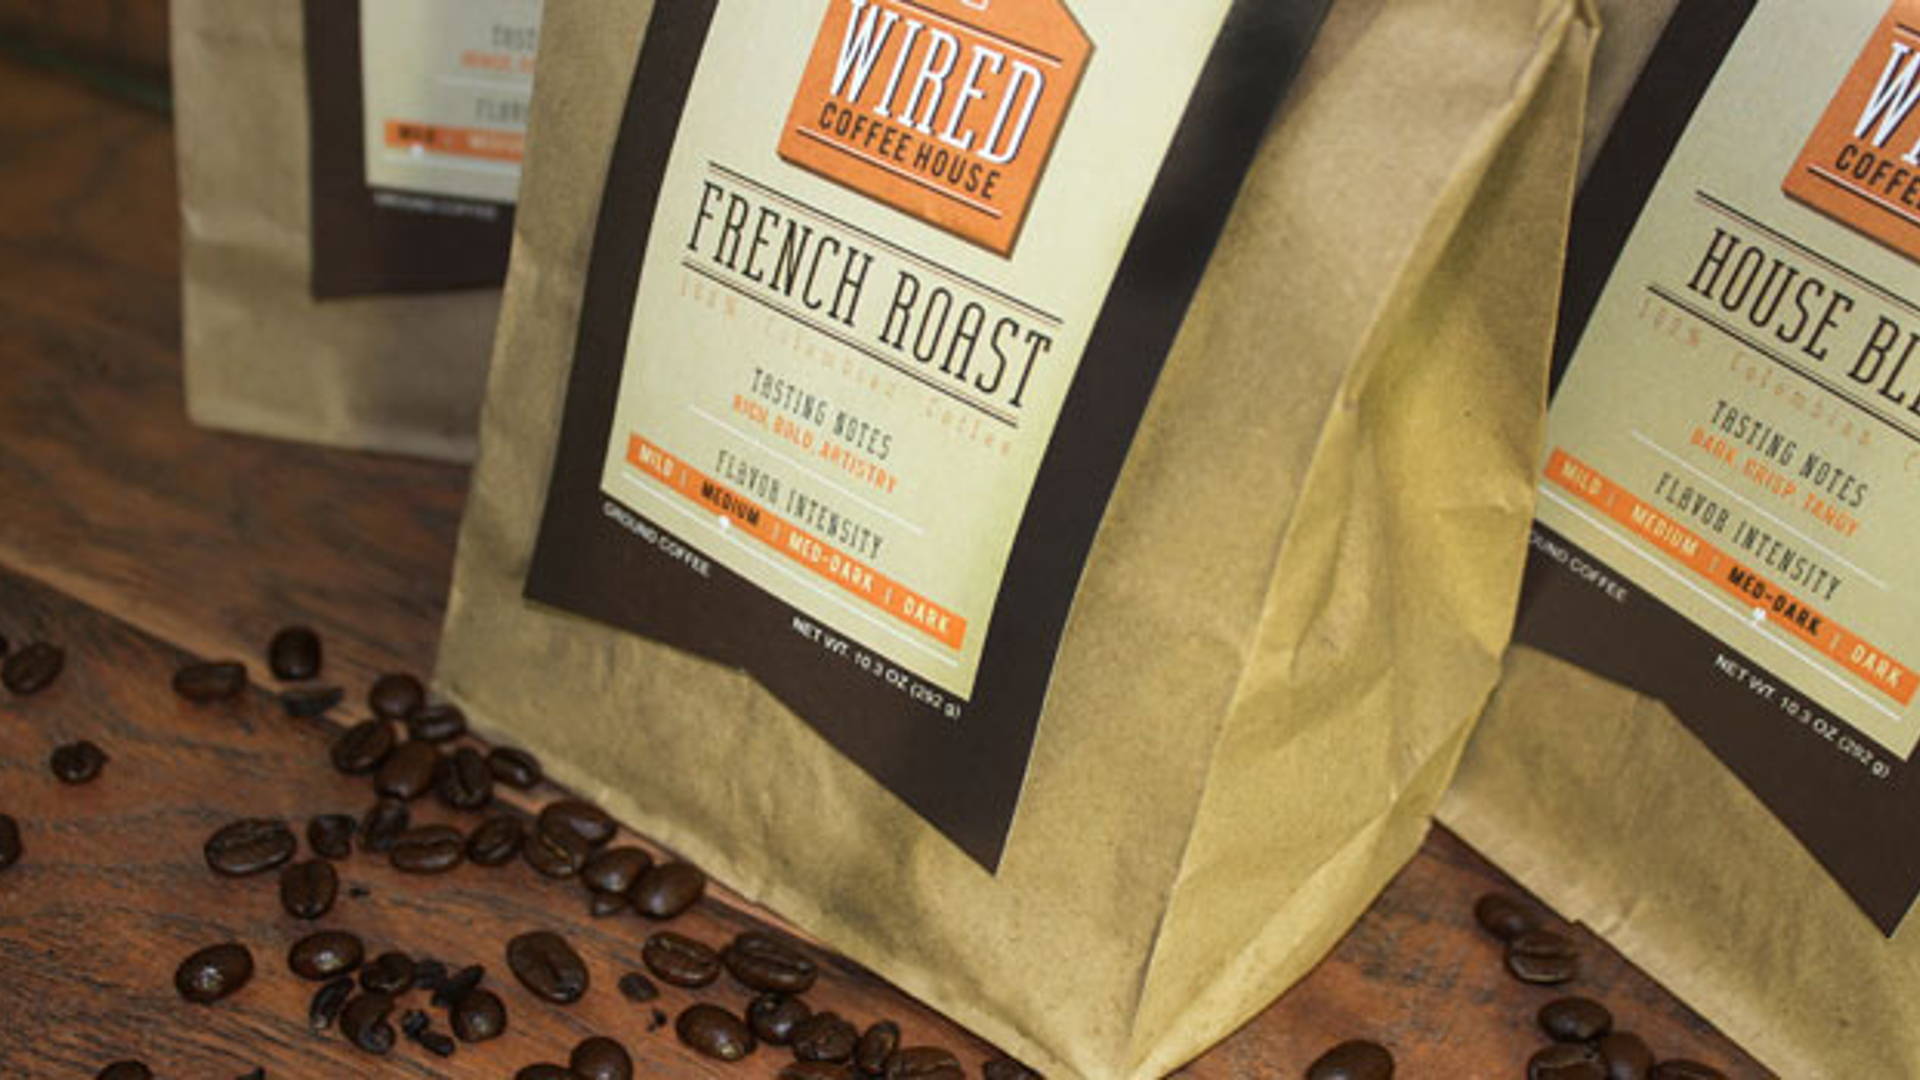 Featured image for Student Spotlight: Wired Coffee House